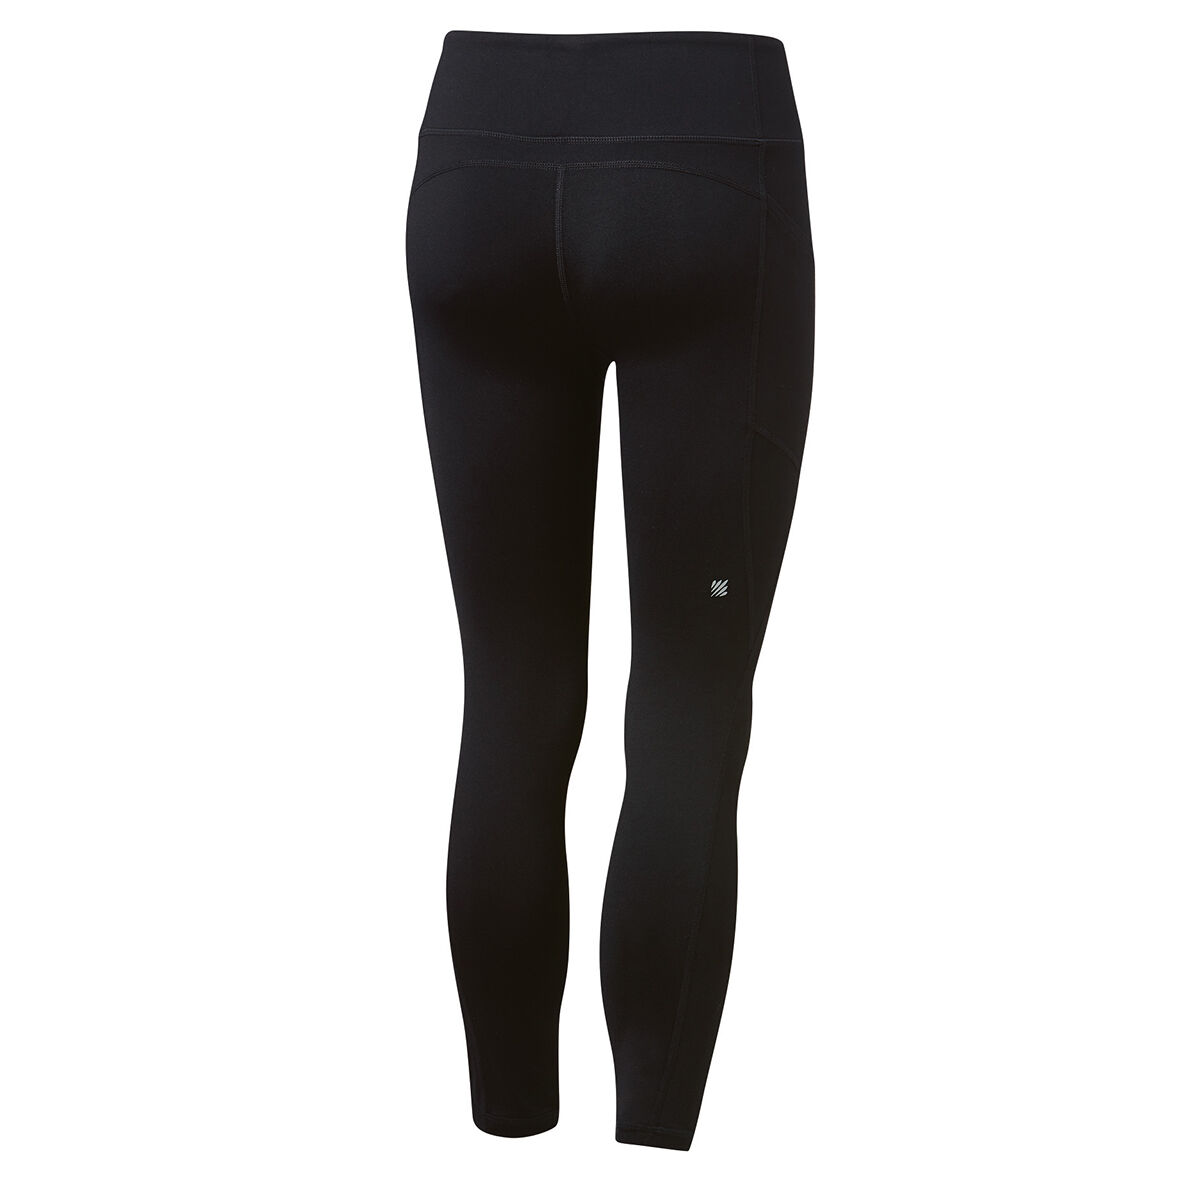 pocket tights be activewear on women's leggings with pockets australia